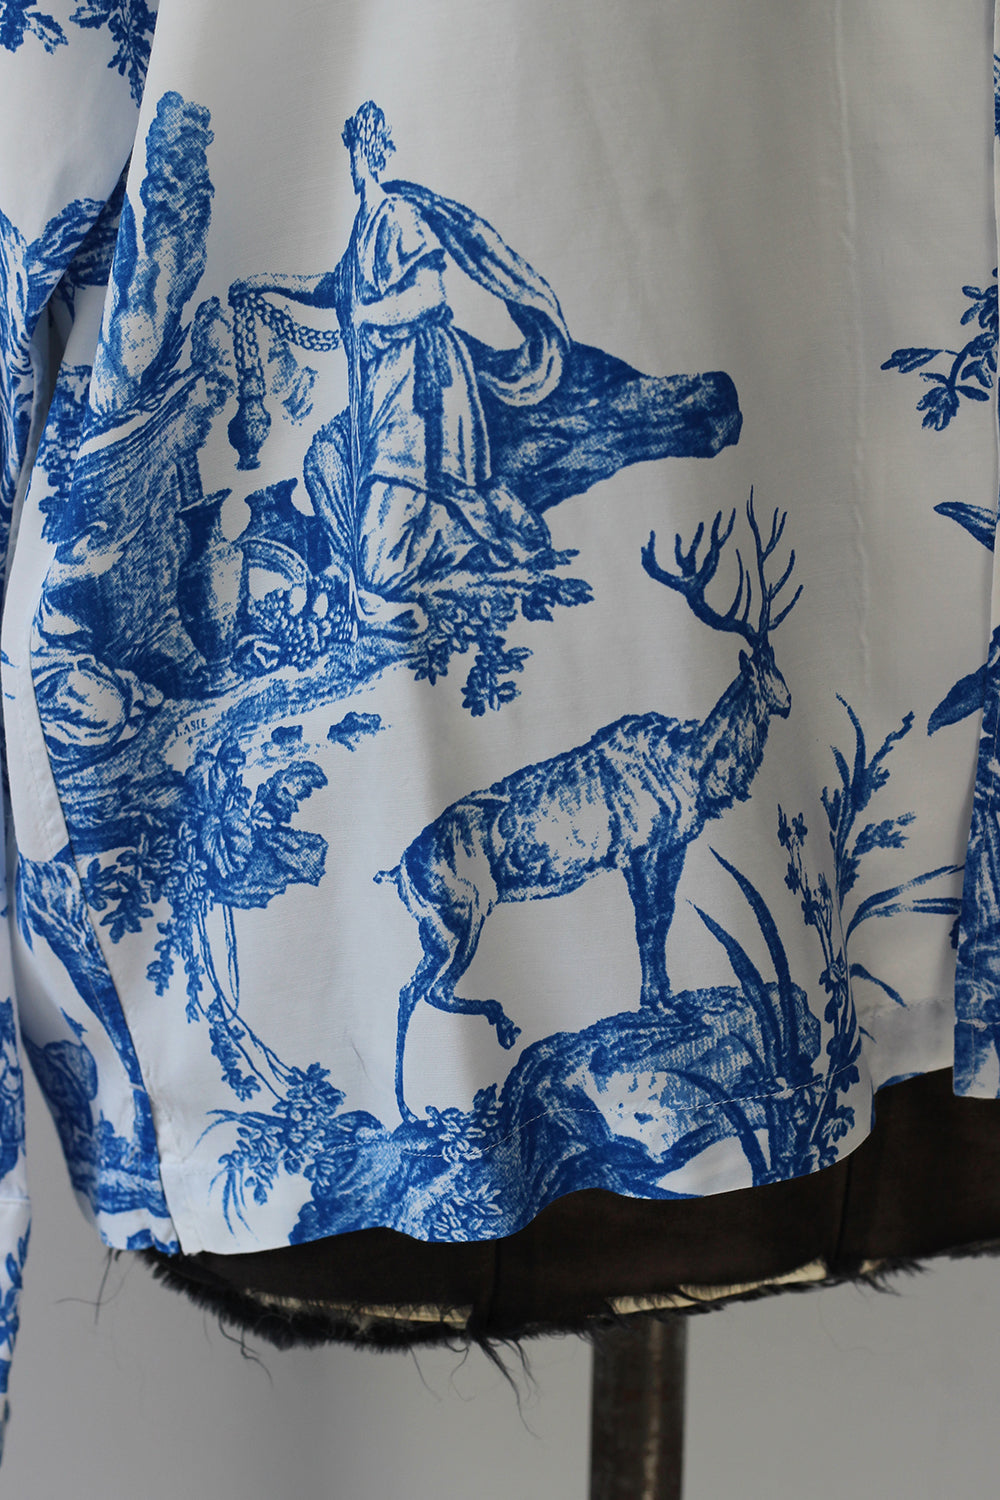 UNUSED "4 continents print long sleeve shirt" (white×blue)